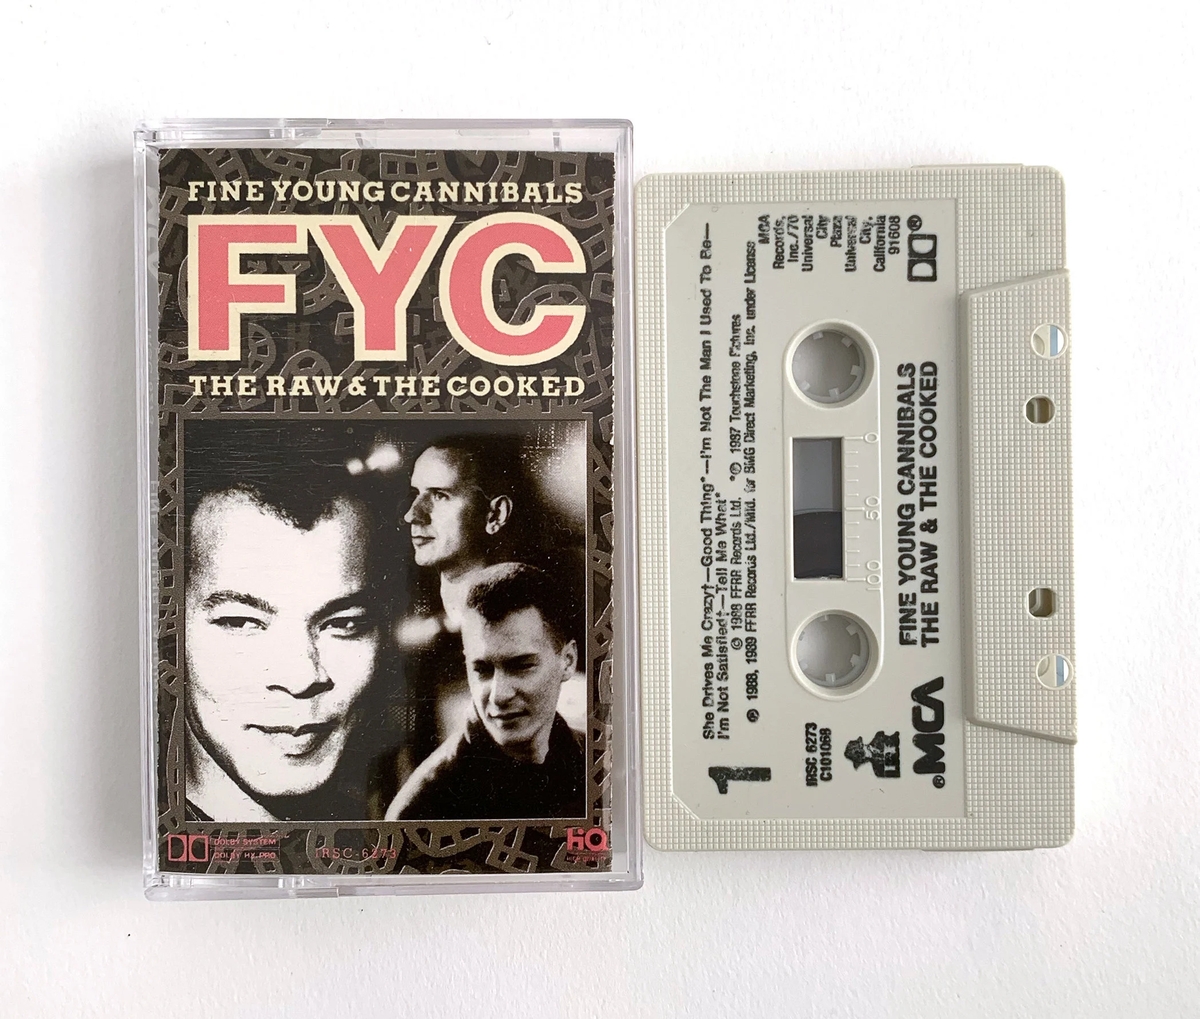 the Fine Young Cannibals Raw And The Cooked album on cassette